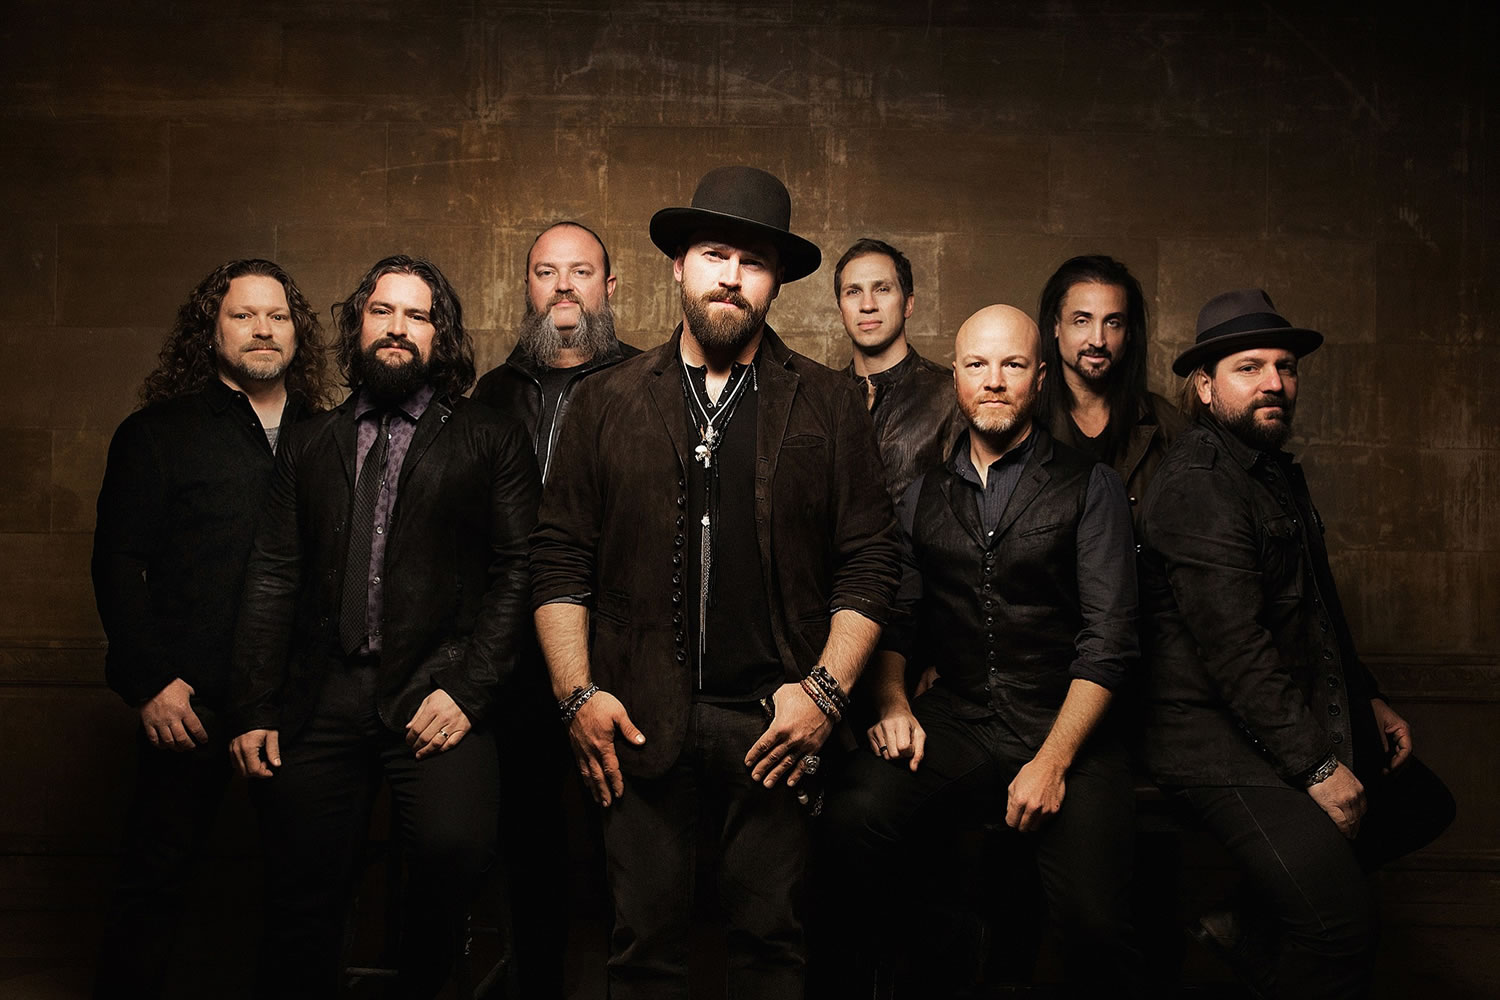 The Zac Brown Band perform Sunday at Amphitheater Northwest in Ridgefield.